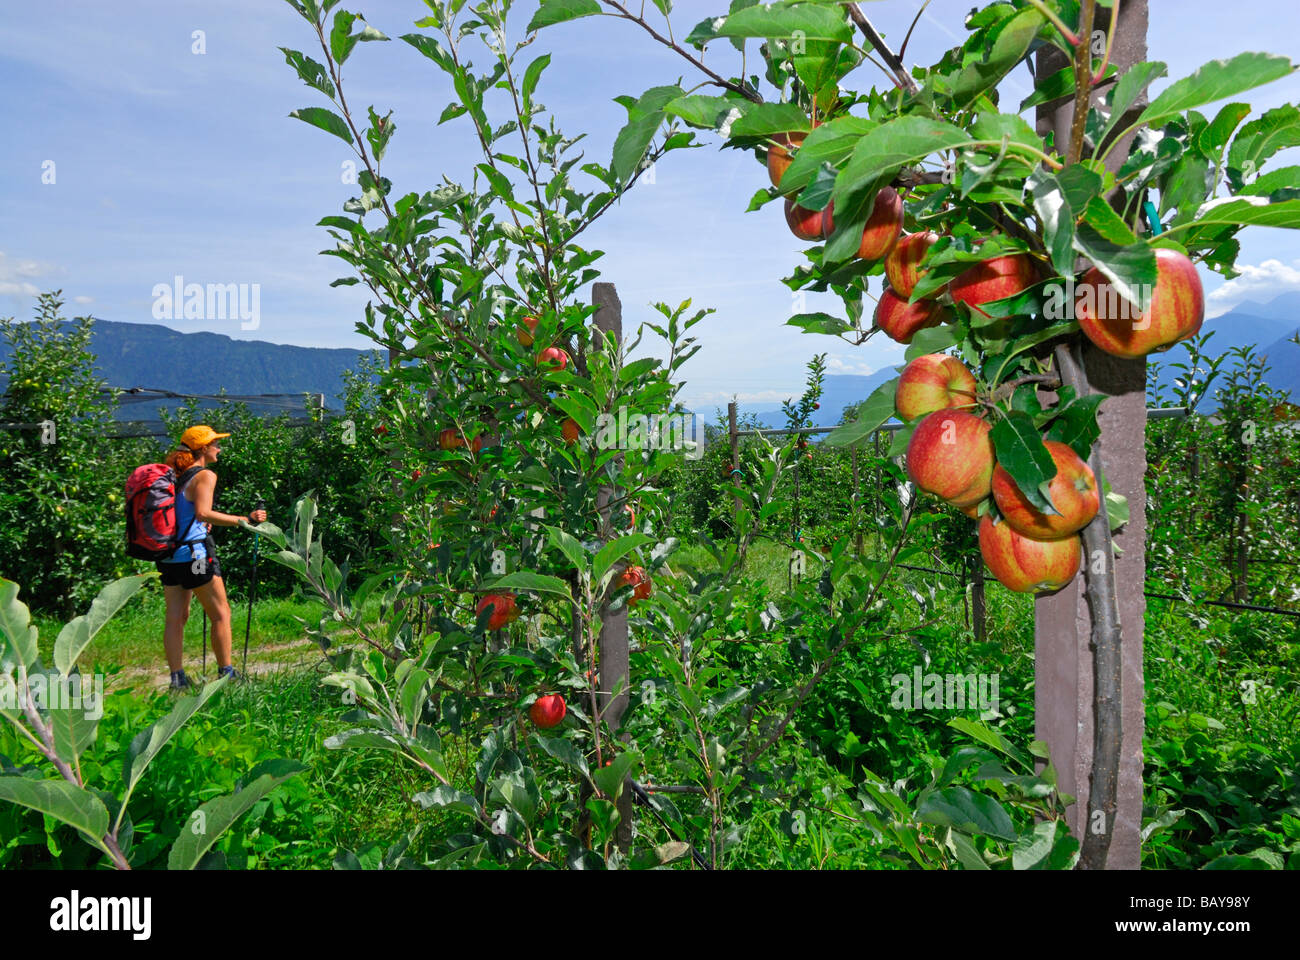 young woman on trail through plantation of fruit with apples on the trees, Dorf Tirol, Texelgruppe range, Oetztal range, South T Stock Photo